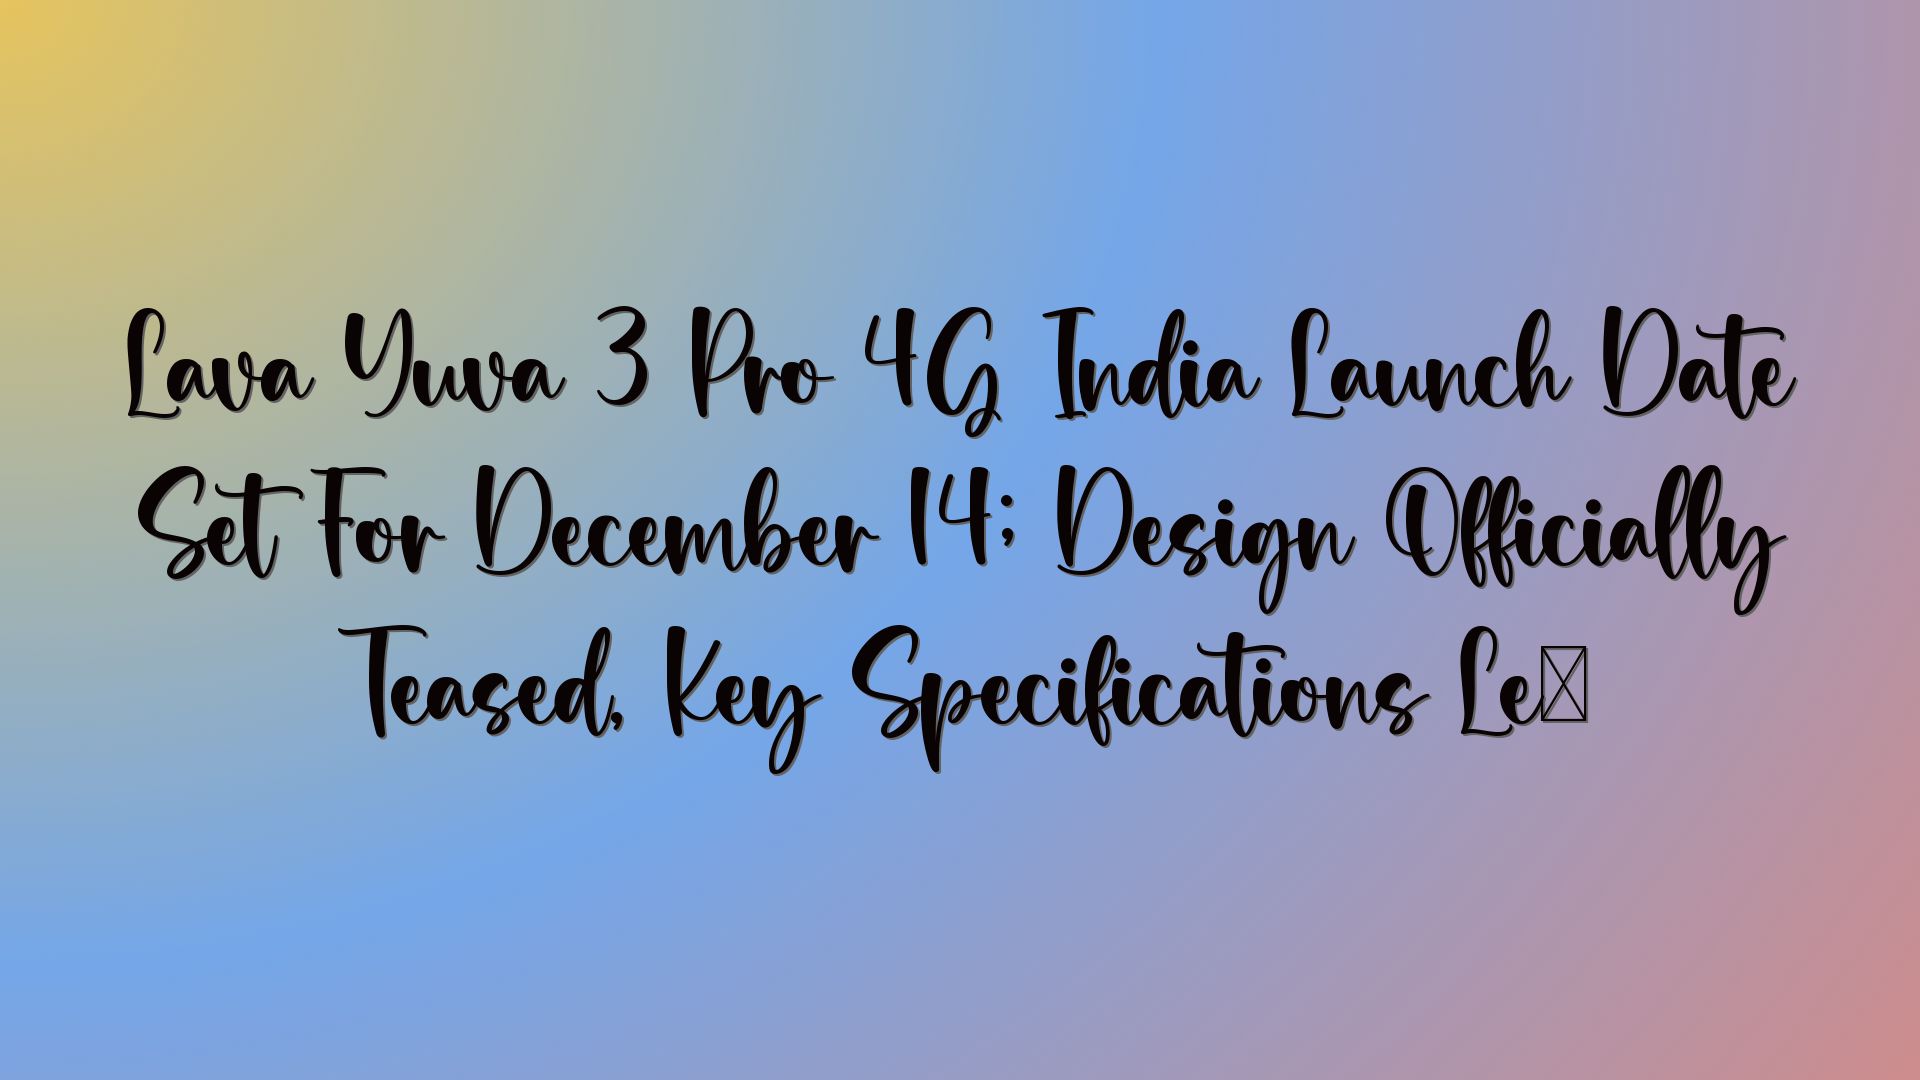 Lava Yuva 3 Pro 4G India Launch Date Set For December 14; Design Officially Teased, Key Specifications Le…